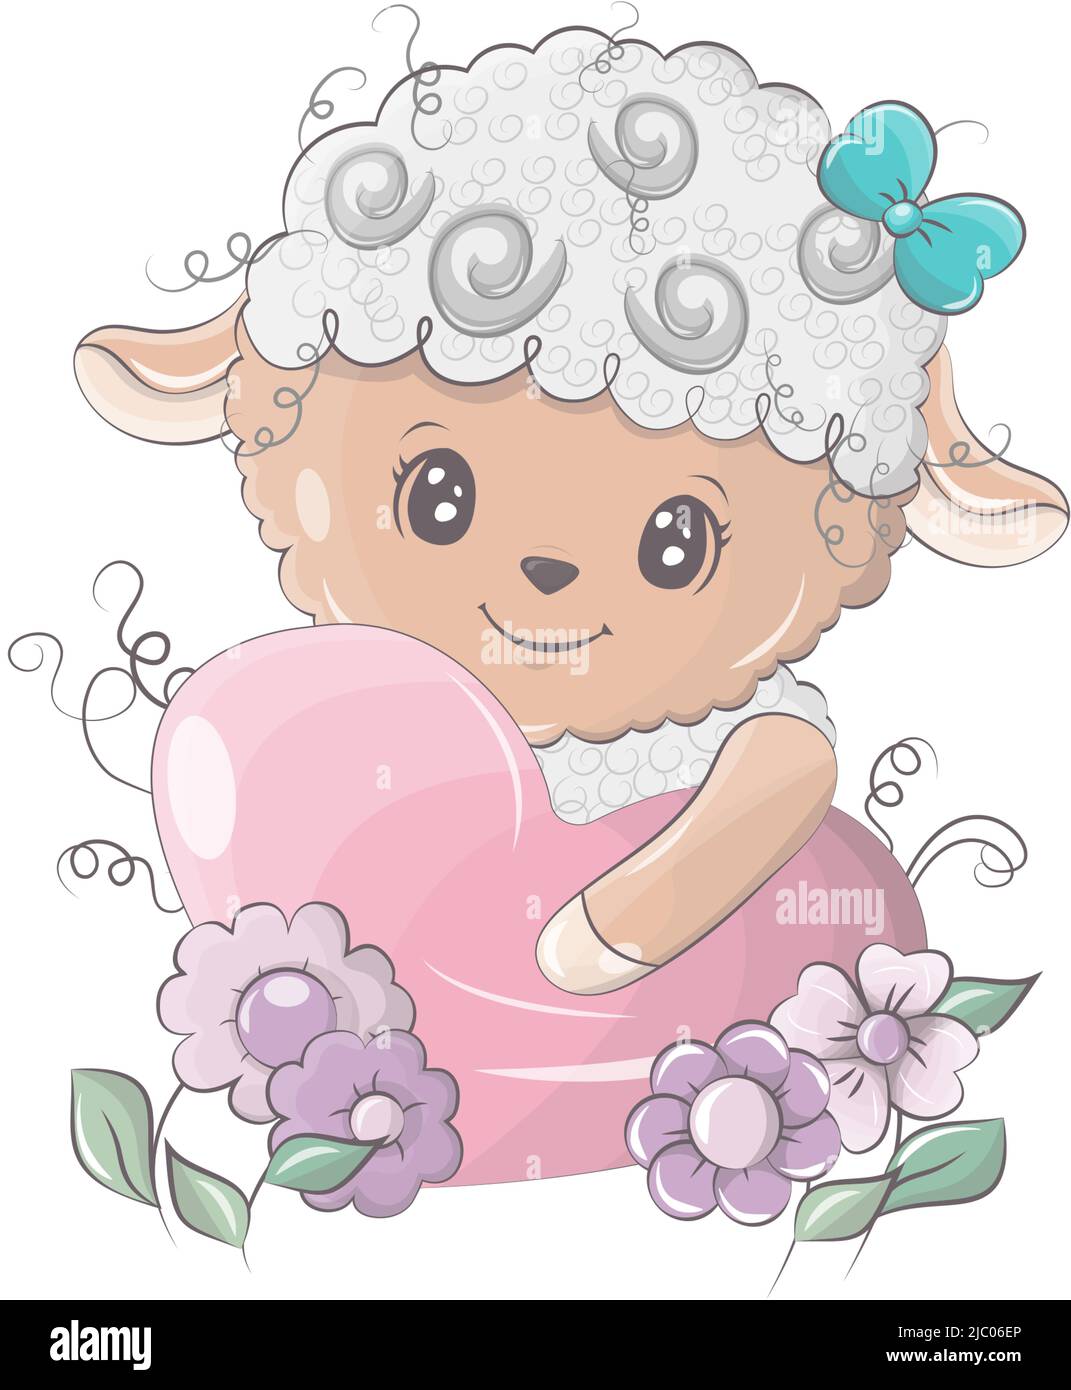 Sheep cartoon picture illumination. Sheep hugs a cute heart. Cute little illustration of lamb for kids, baby book, fairy tales, baby shower invitation Stock Vector